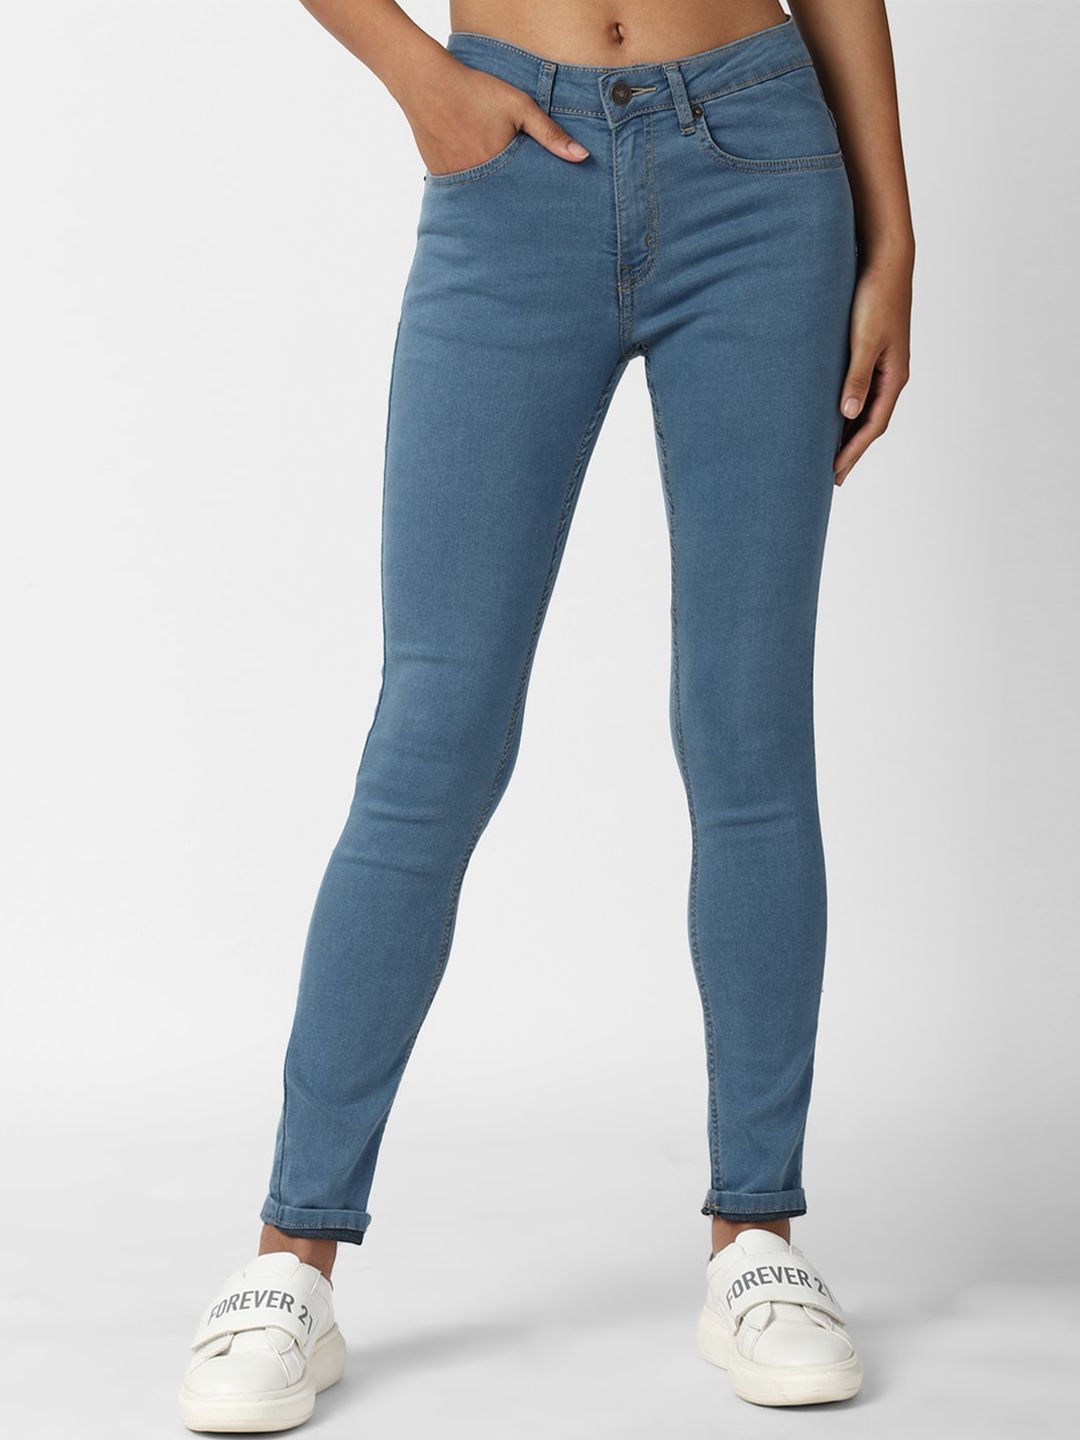 FOREVER 21 Women Blue Stretchable Jeans Price in India